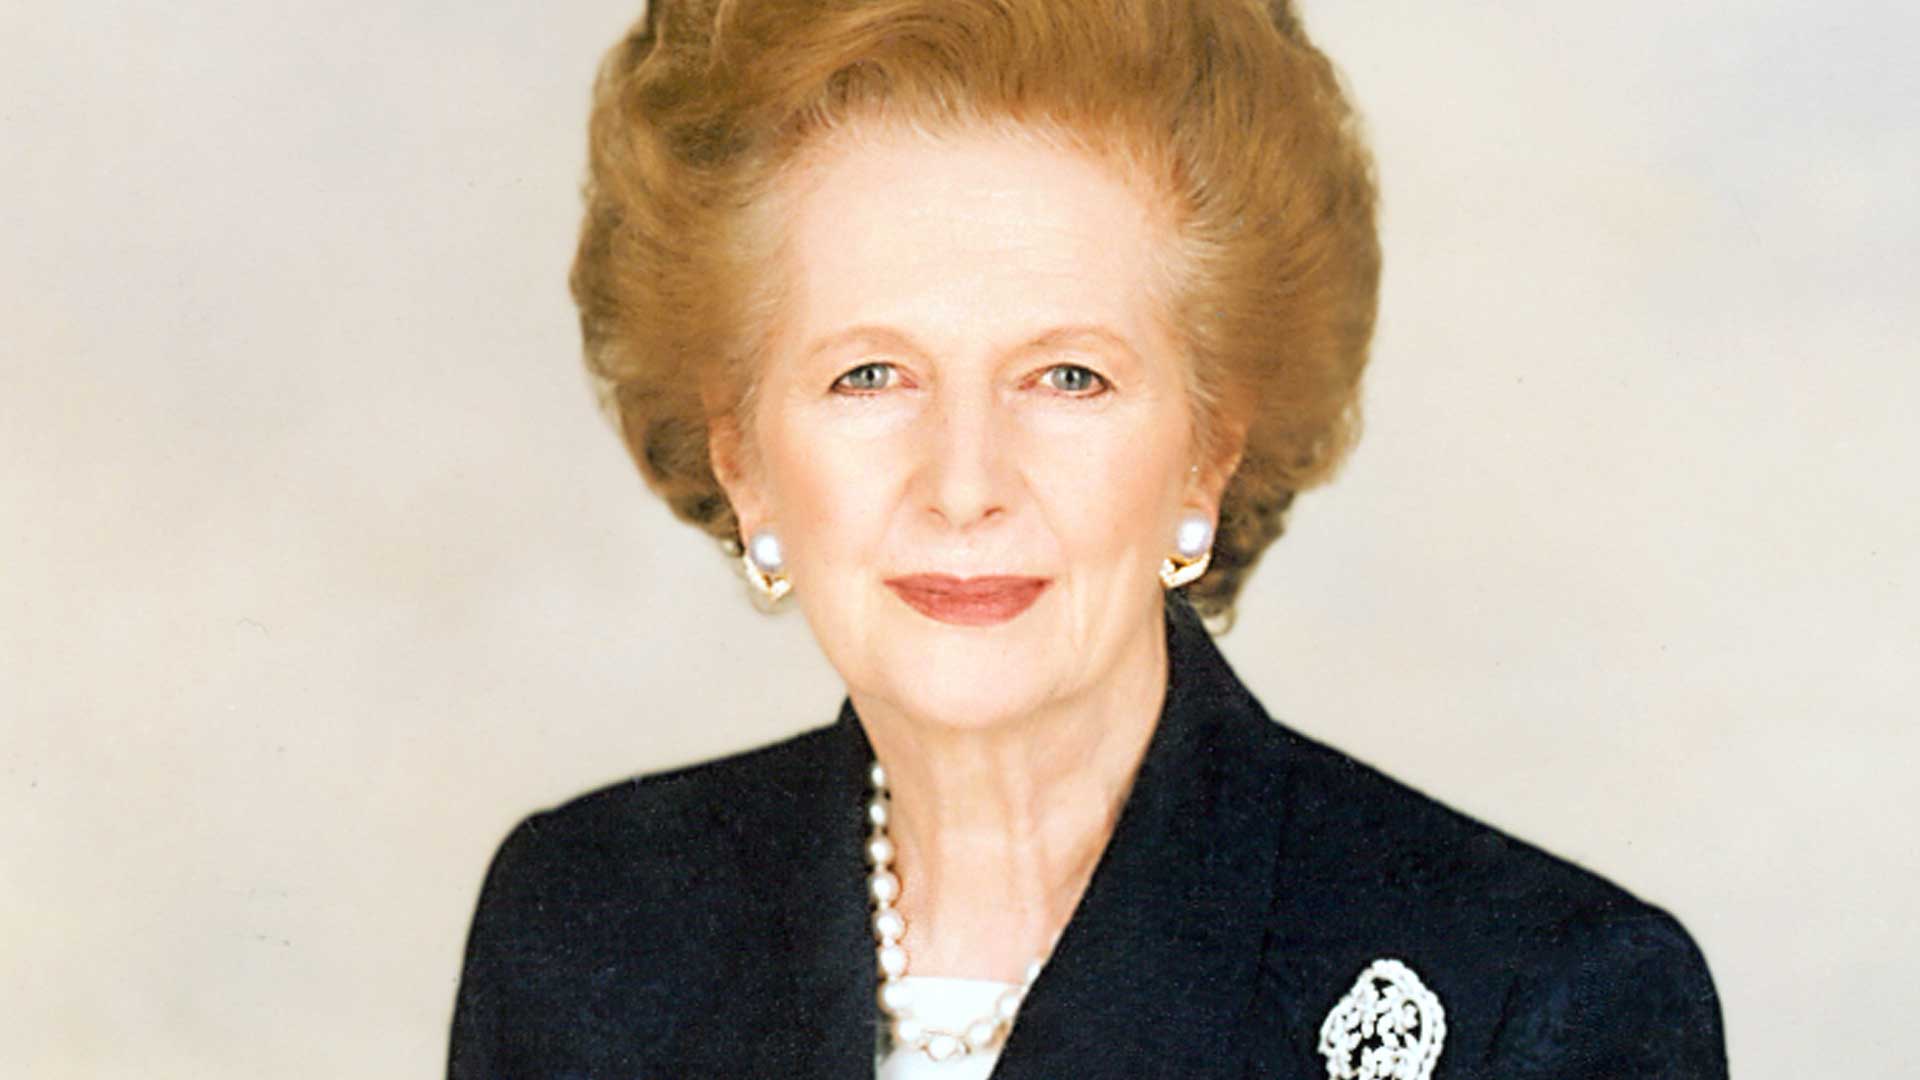 The first woman to become Prime Minister 